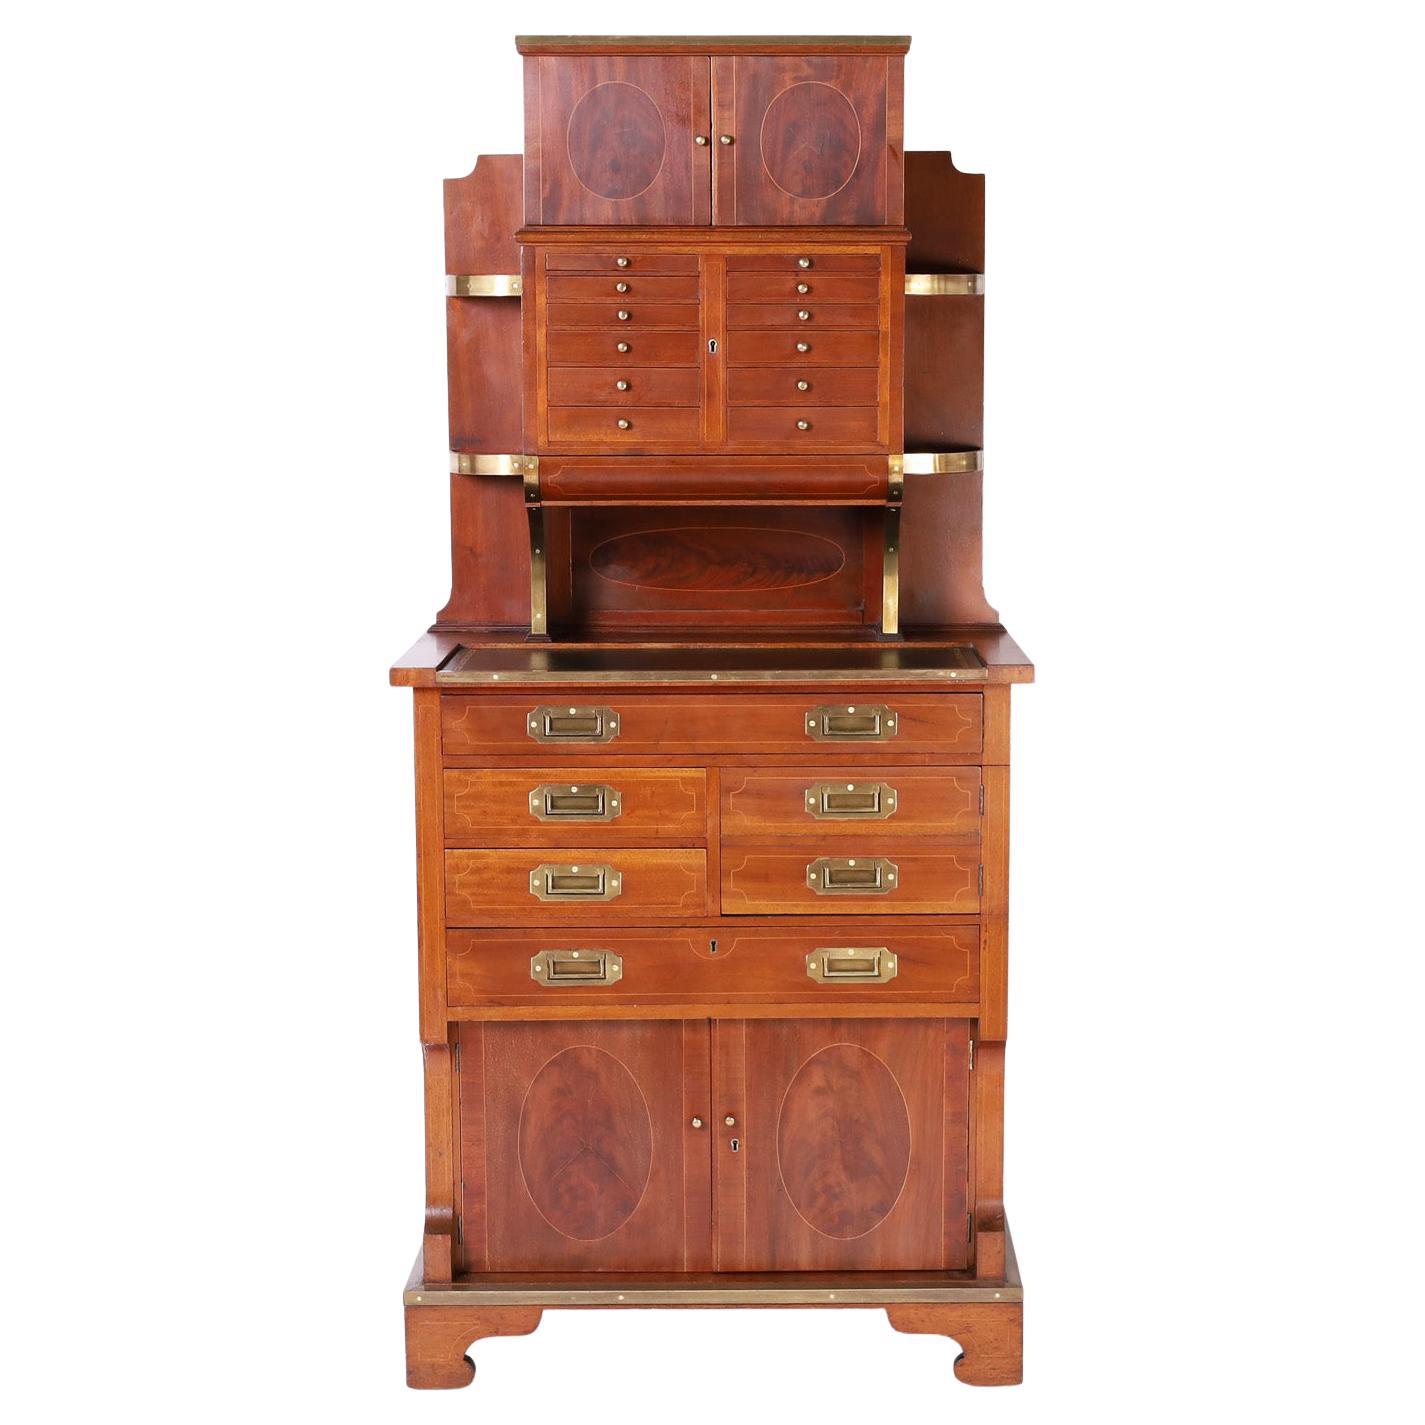 Edwardian Captain's upright secretary crafted in mahogany with inlaid ovals on the cabinet door fronts, brass campaign hardware, tooled leather writing surface, plenty of drawer storage and set on classic bracket feet.